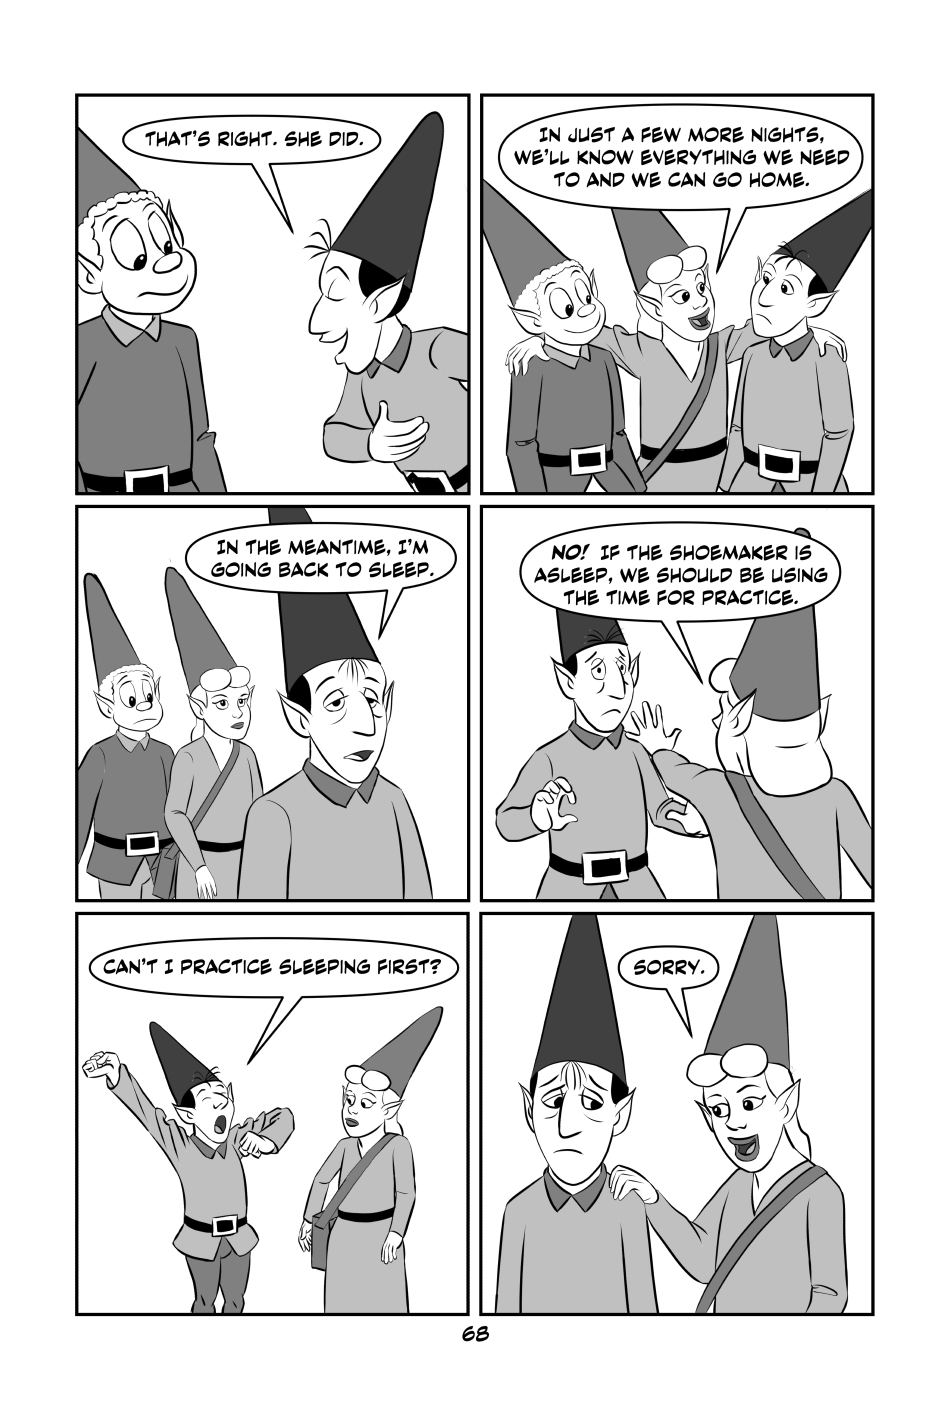 elves page 68